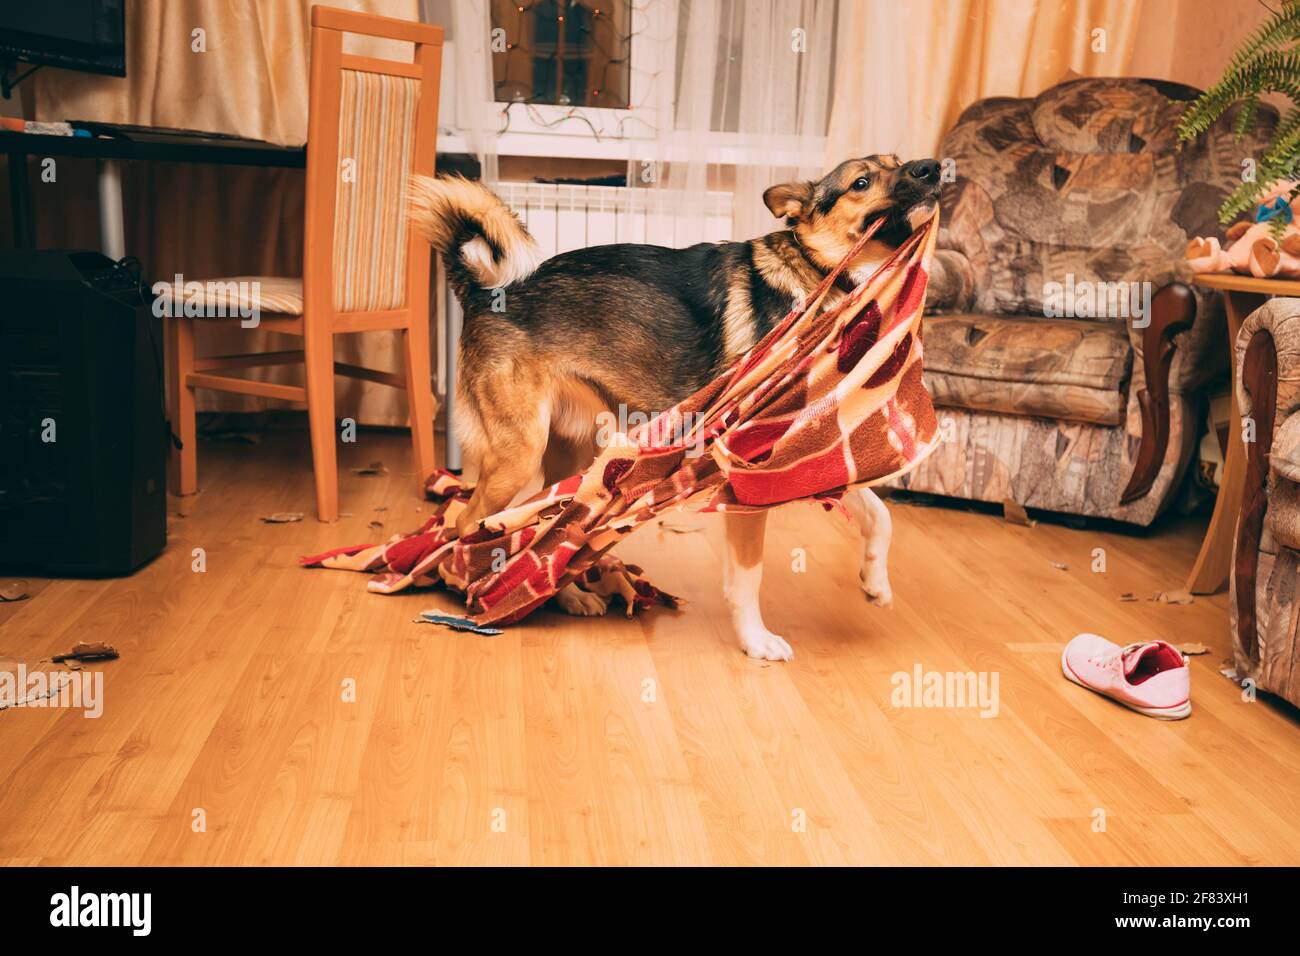 Funny Domestic Dog Tearing Apart A Blanket by Teeth. Disconcerted Dog by Mess In Apartment Scattered Things. Stock Photo